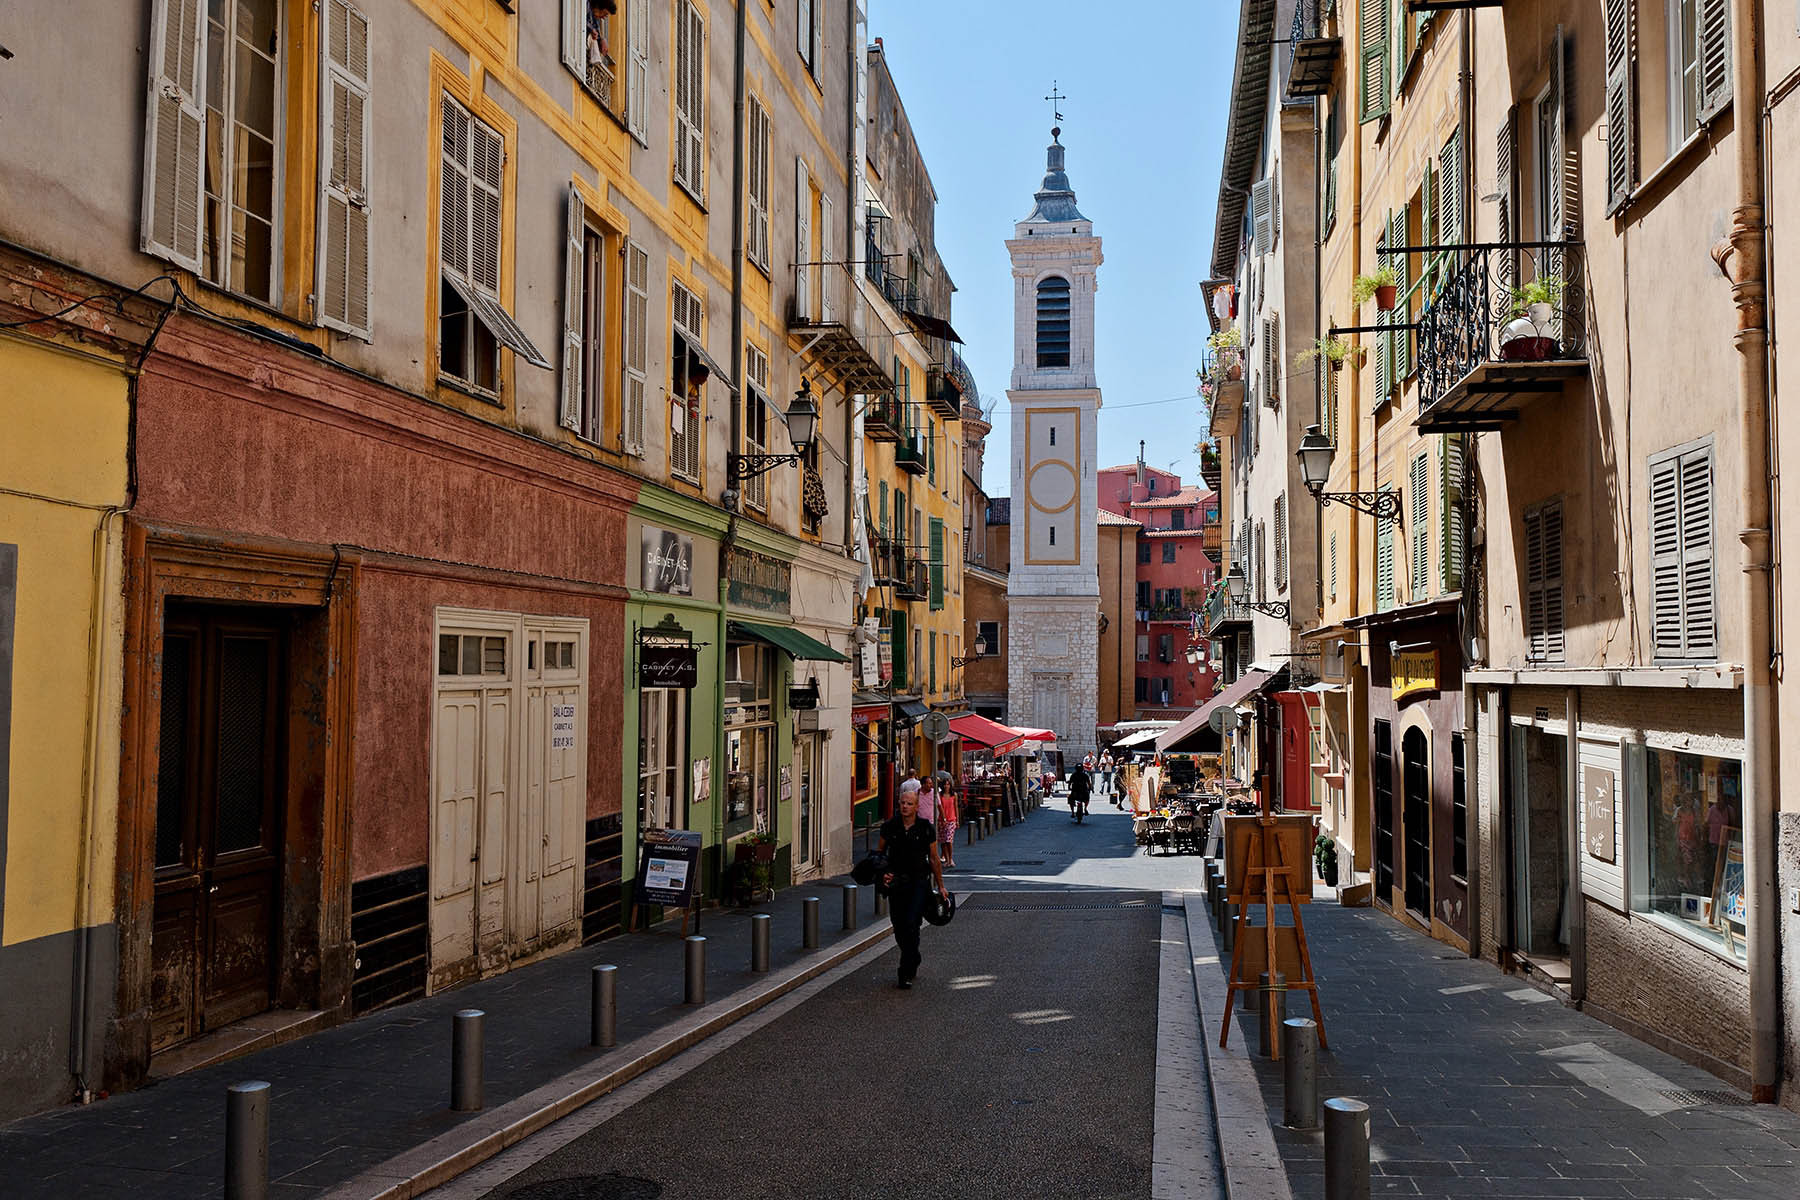 Street of Old Nice, French Riviera. Source Image: Anna Everywhere